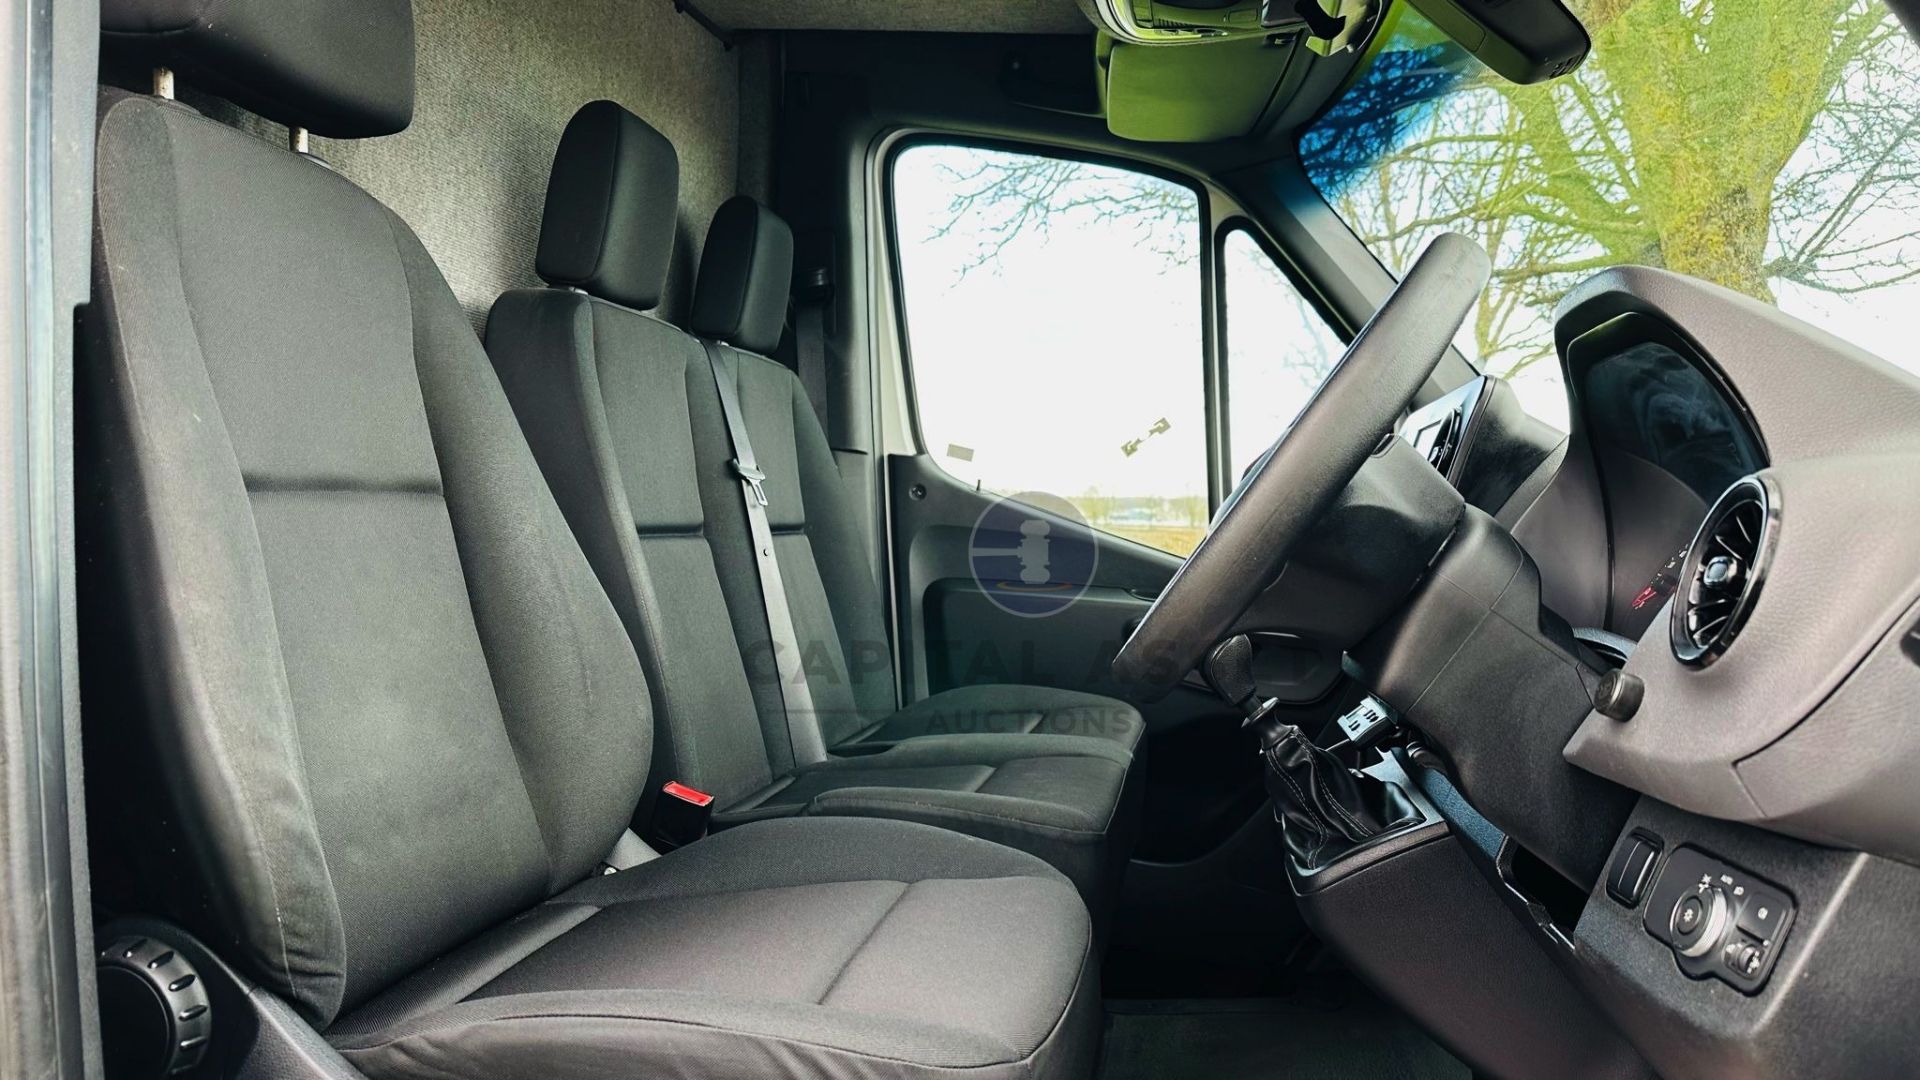 MERCEDES-BENZ SPRINTER 314 CDI *MWB - REFRIGERATED VAN* (2019 - FACELIFT MODEL) *OVERNIGHT STANDBY* - Image 25 of 41